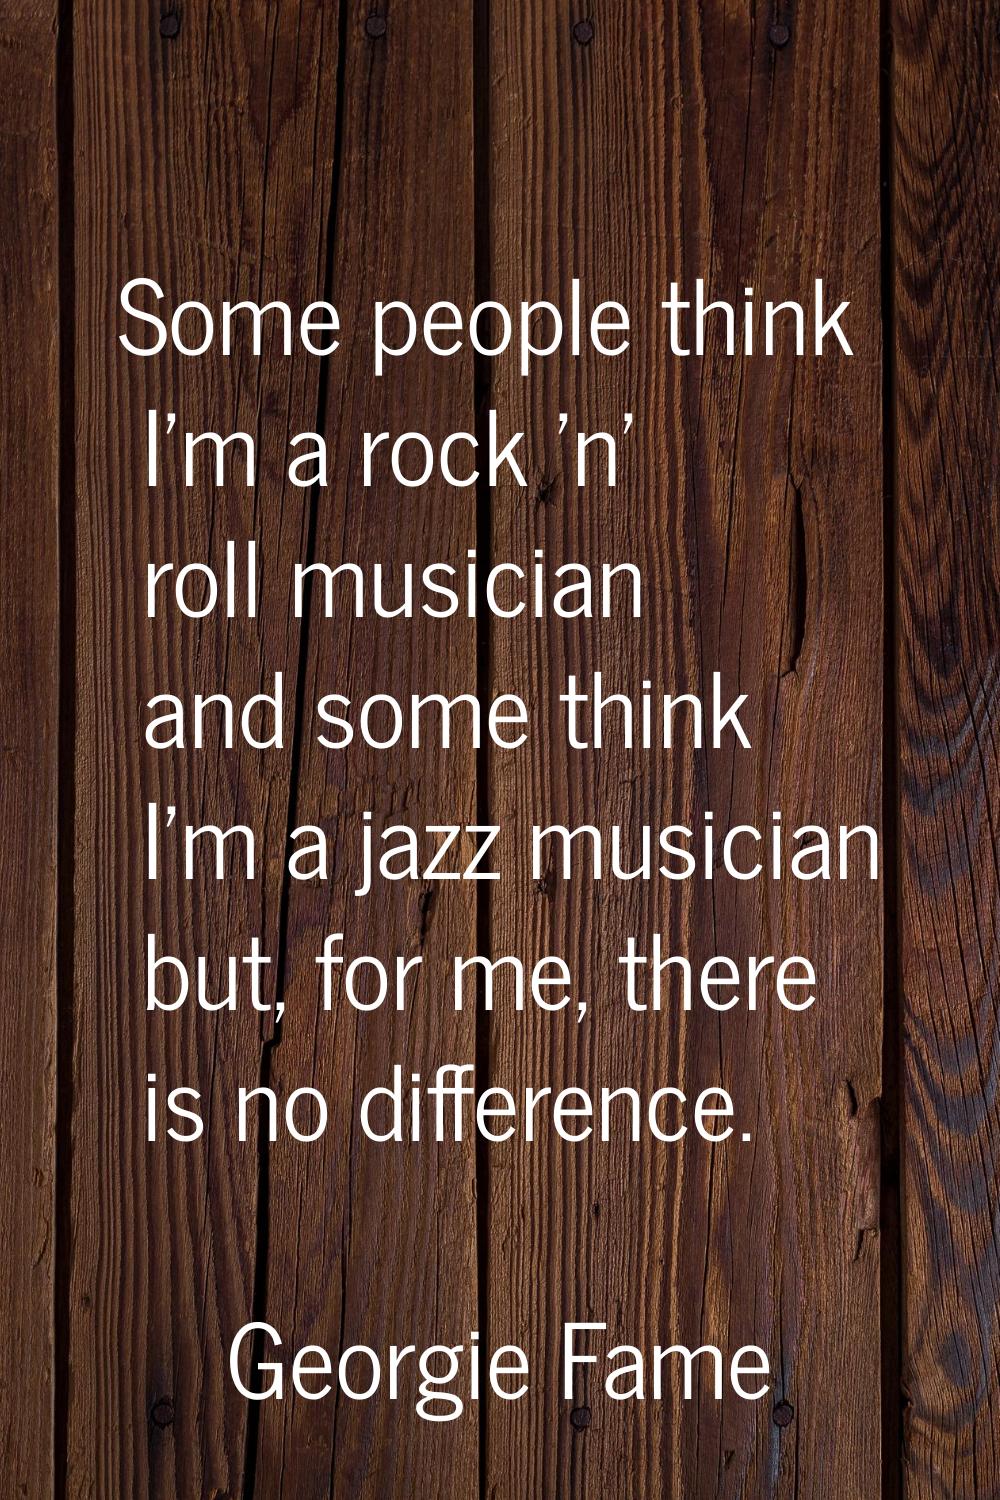 Some people think I'm a rock 'n' roll musician and some think I'm a jazz musician but, for me, ther